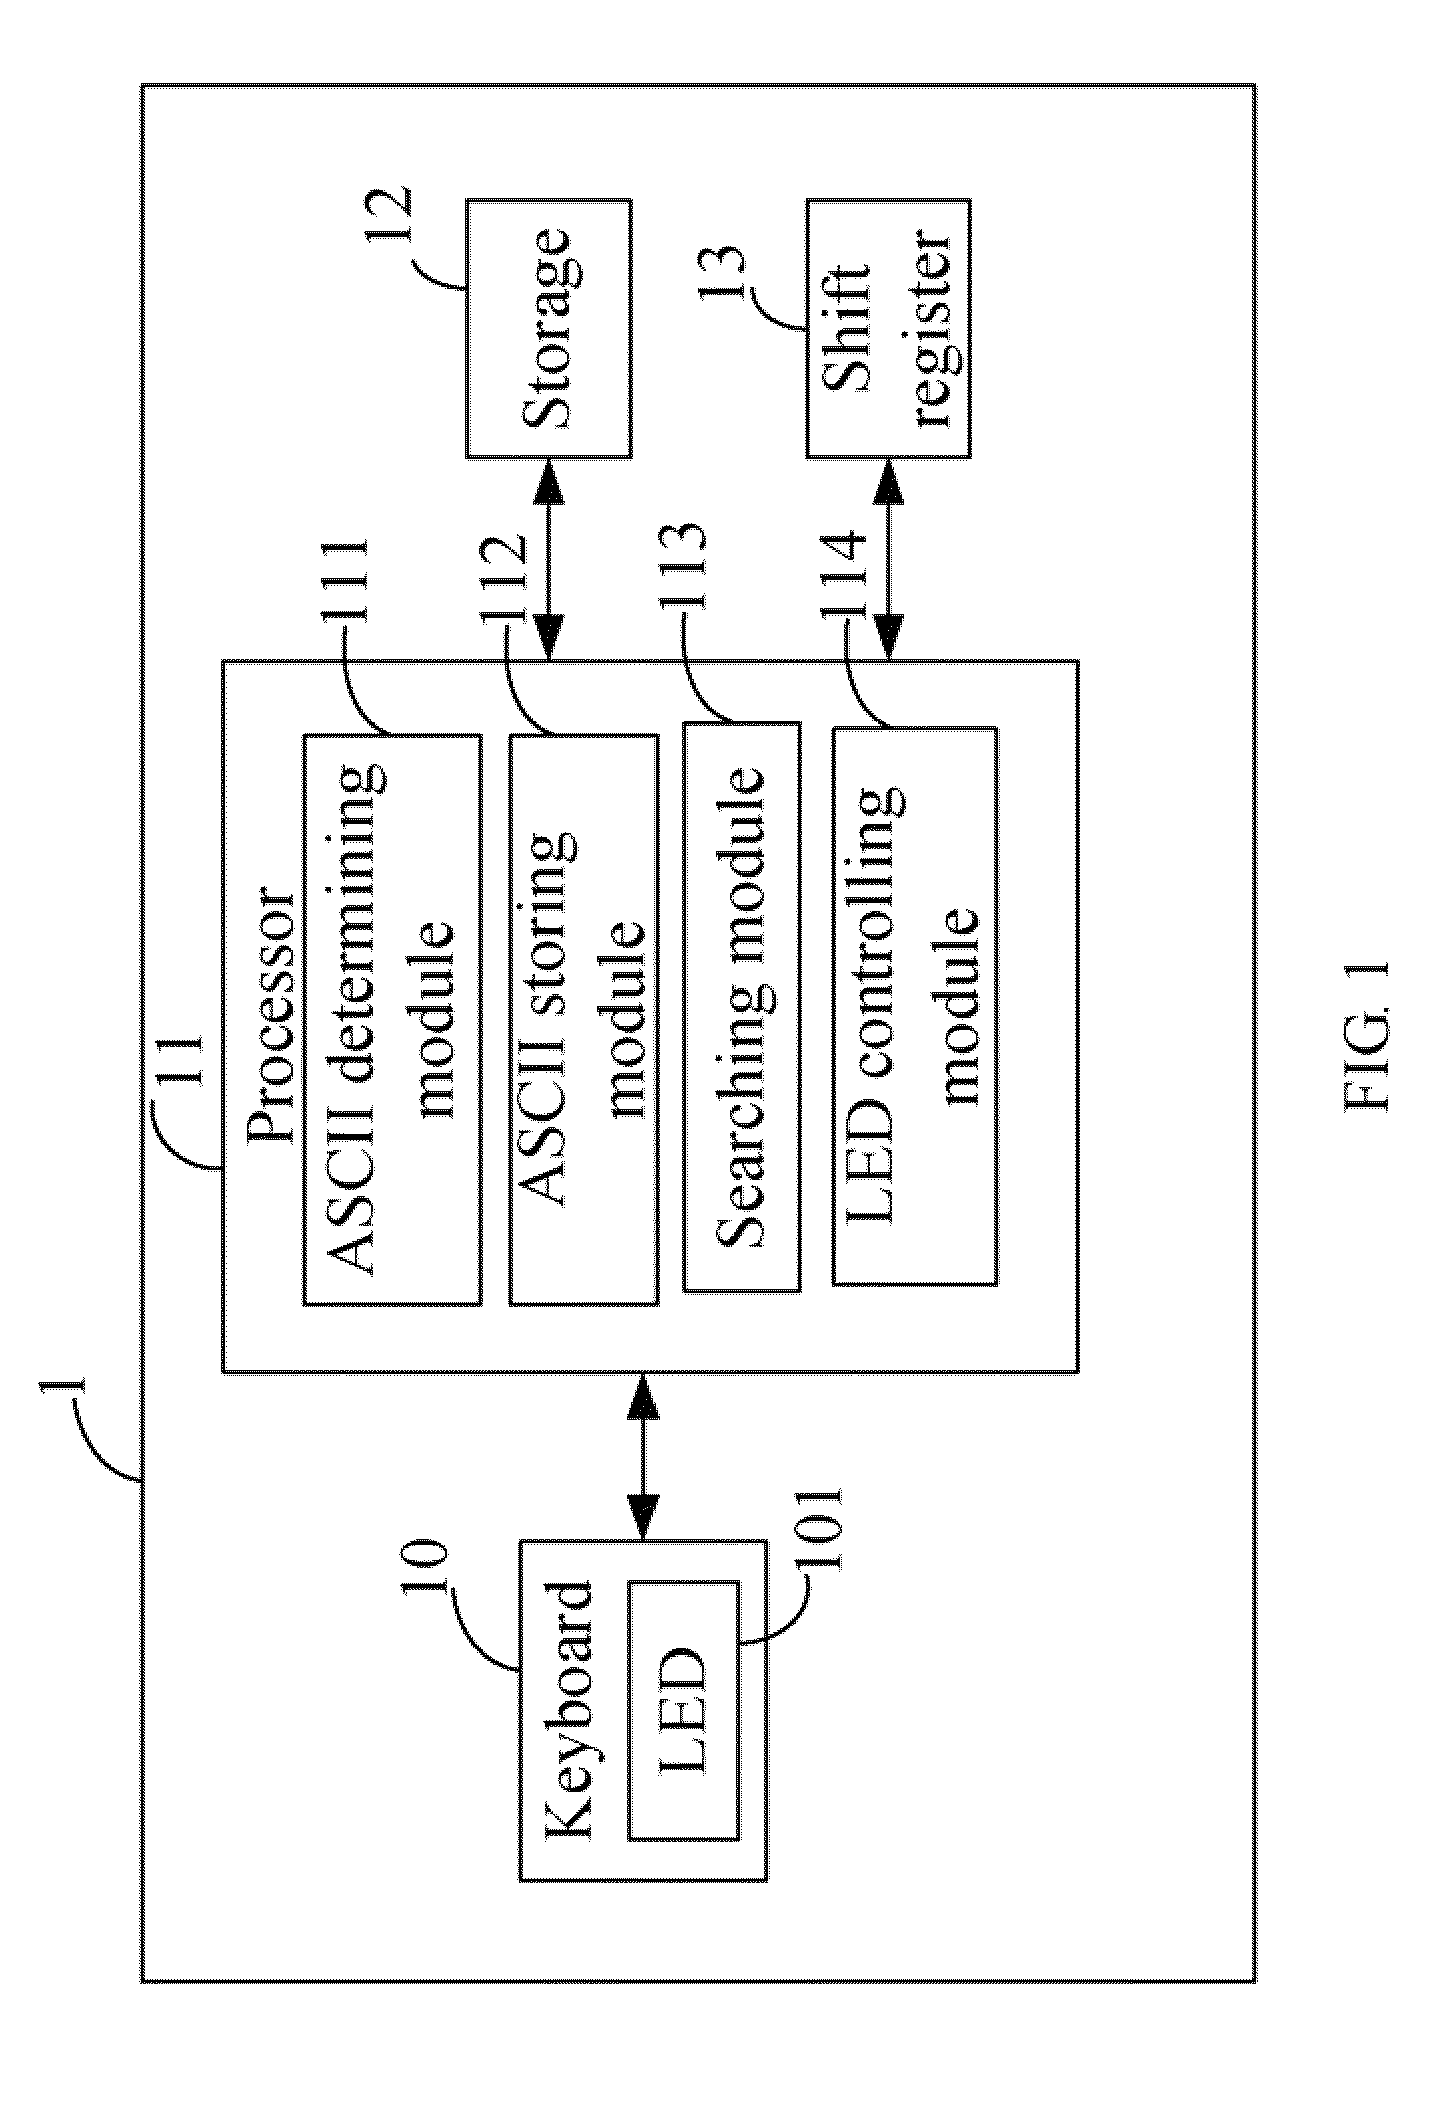 Electronic device with typing prompt function